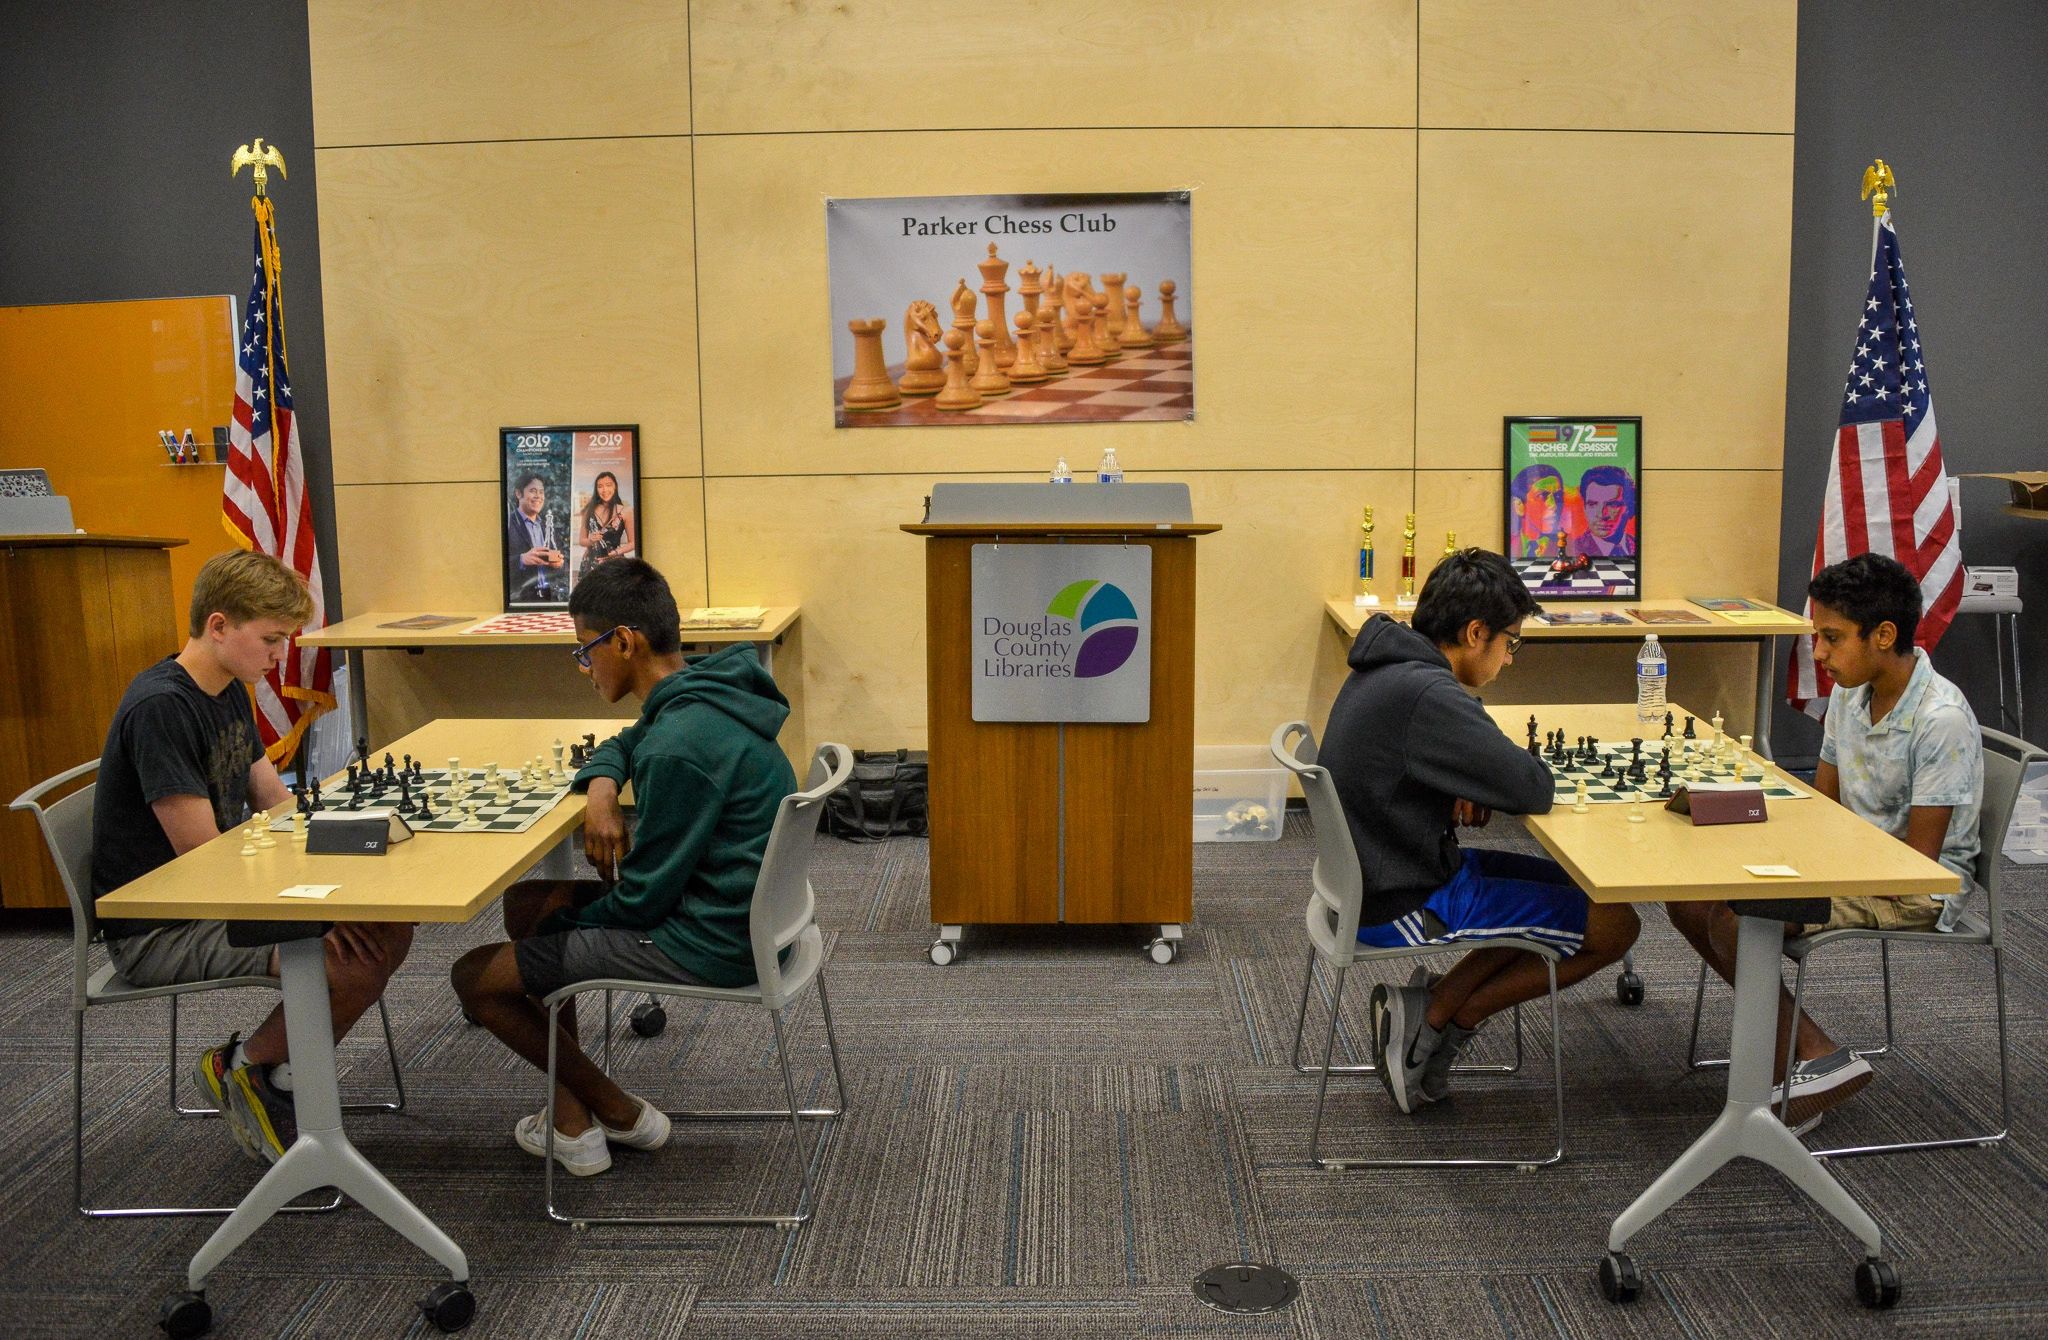 Adult Chess Club - DeKalb County Convention and Visitors Bureau